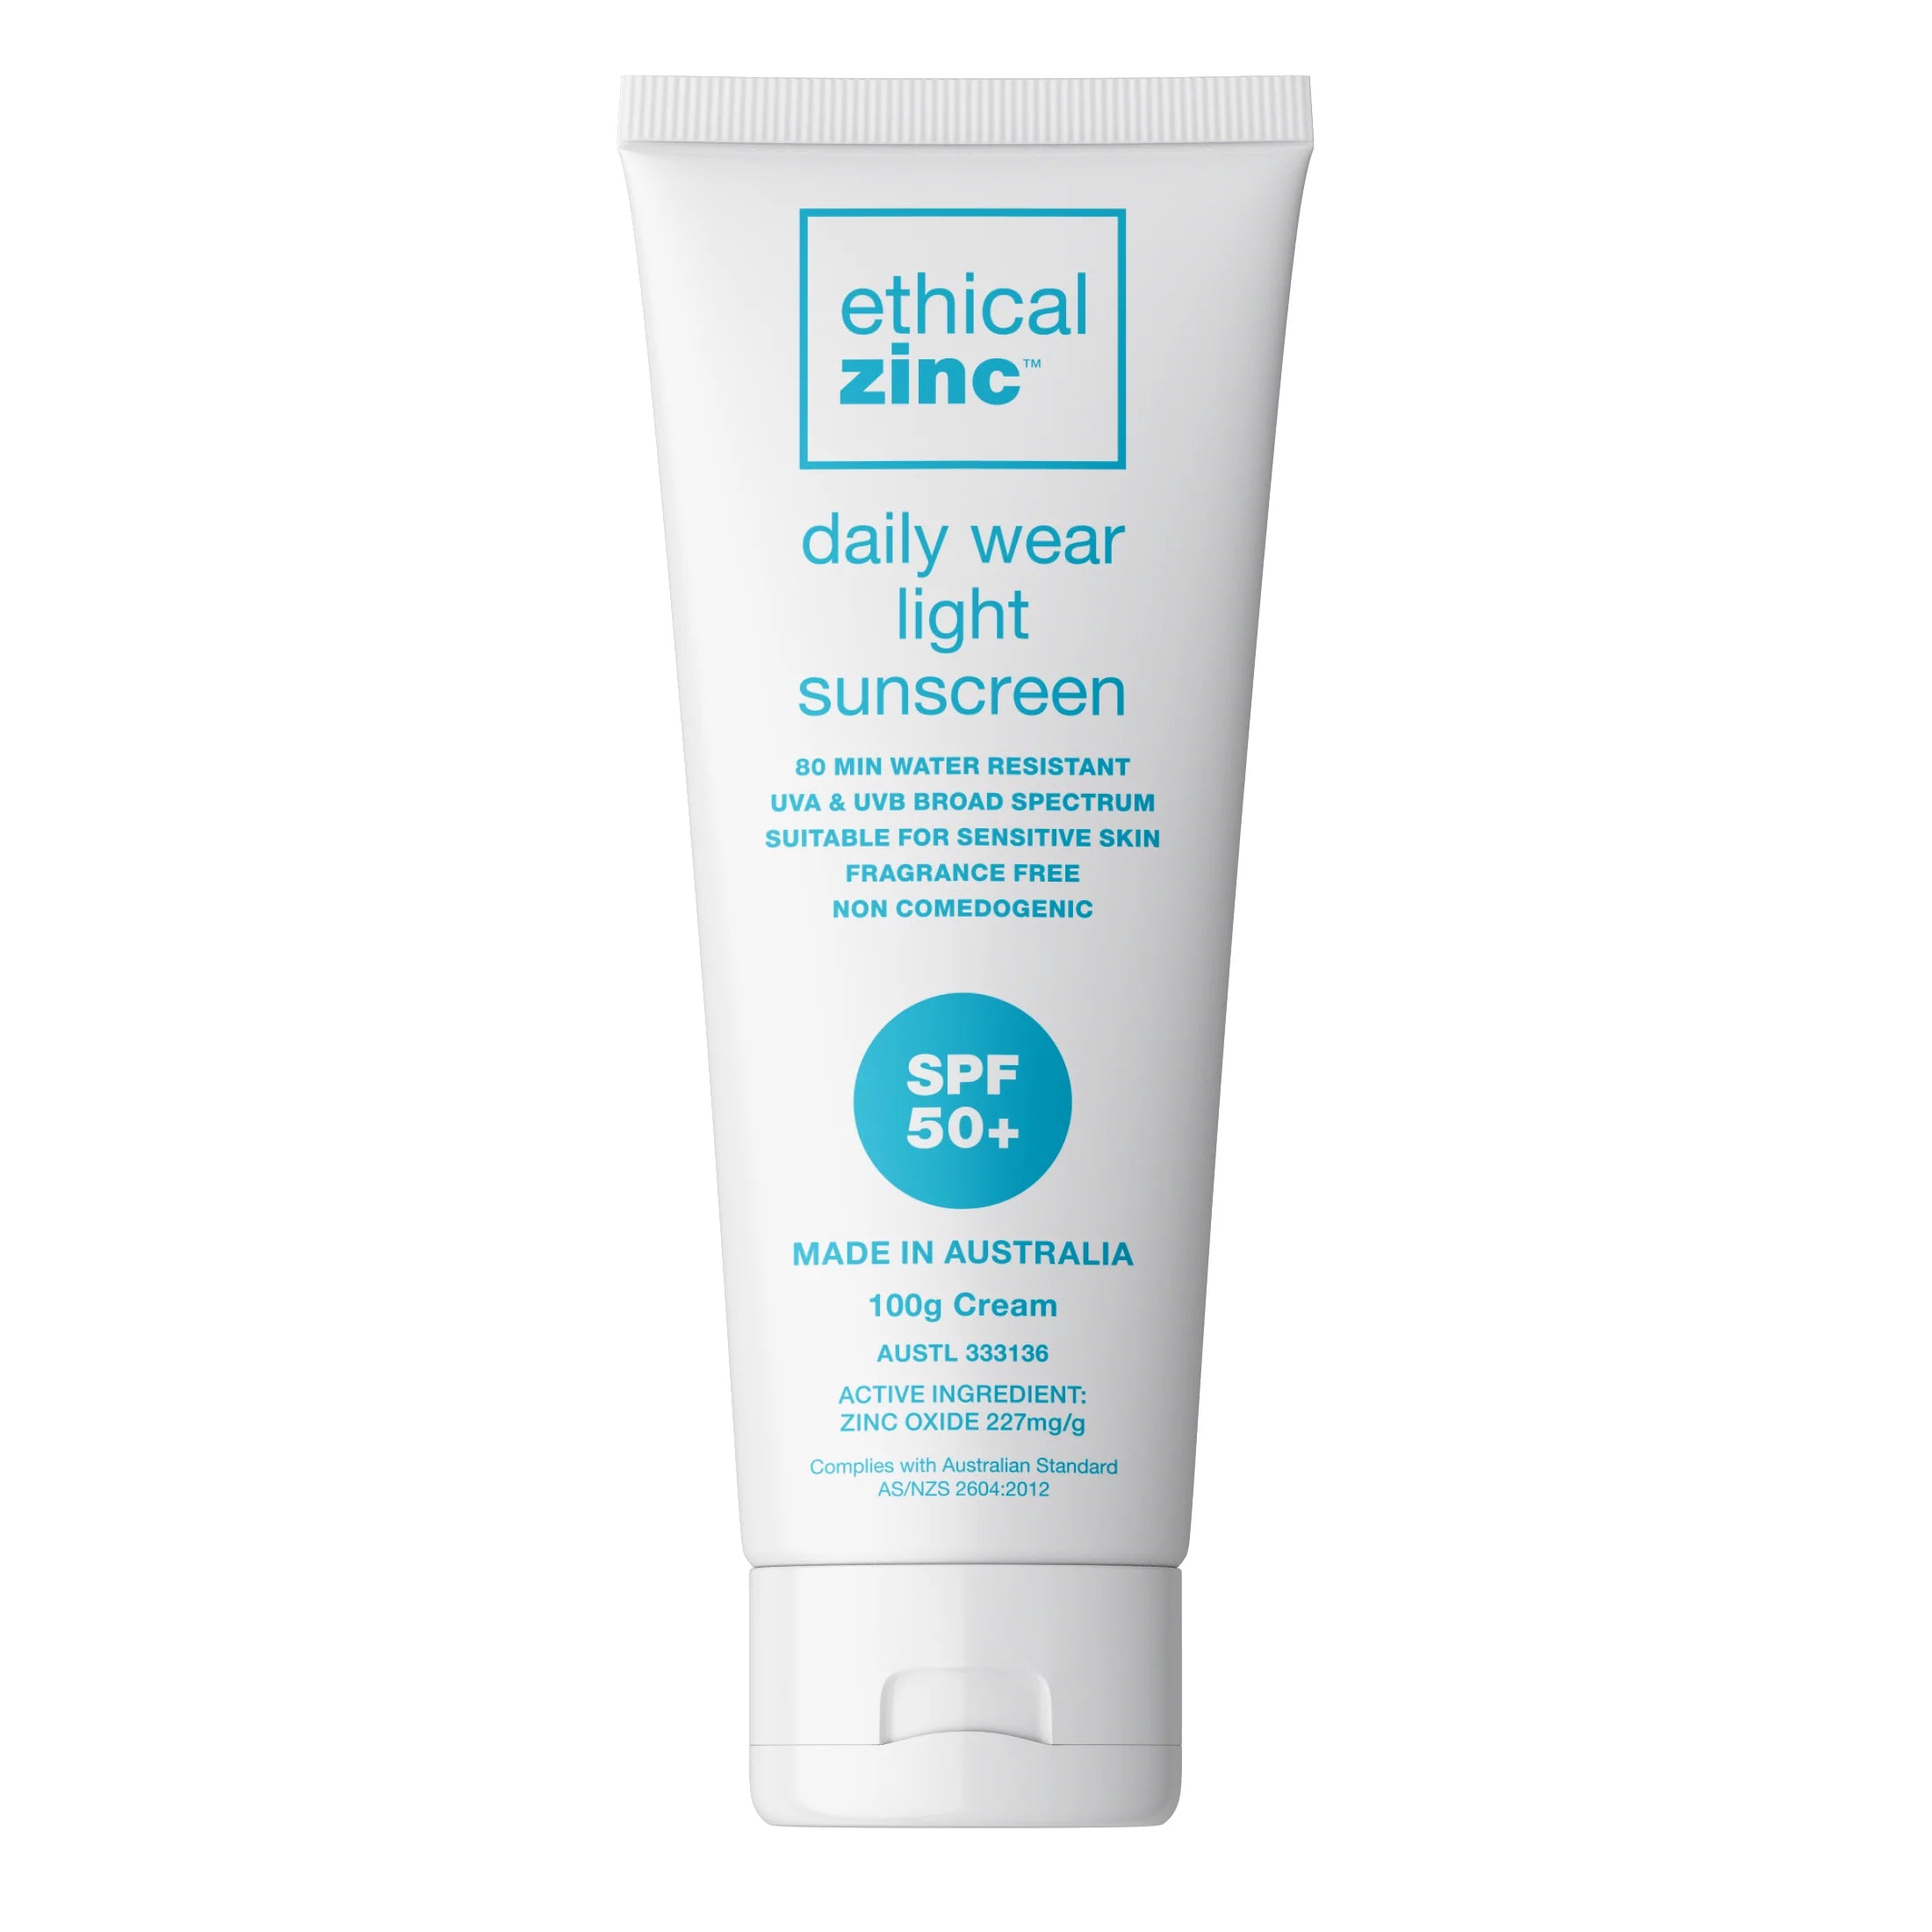 Ethical Zinc Daily Wear Light Sunscreen SPF 50+-The Living Co.